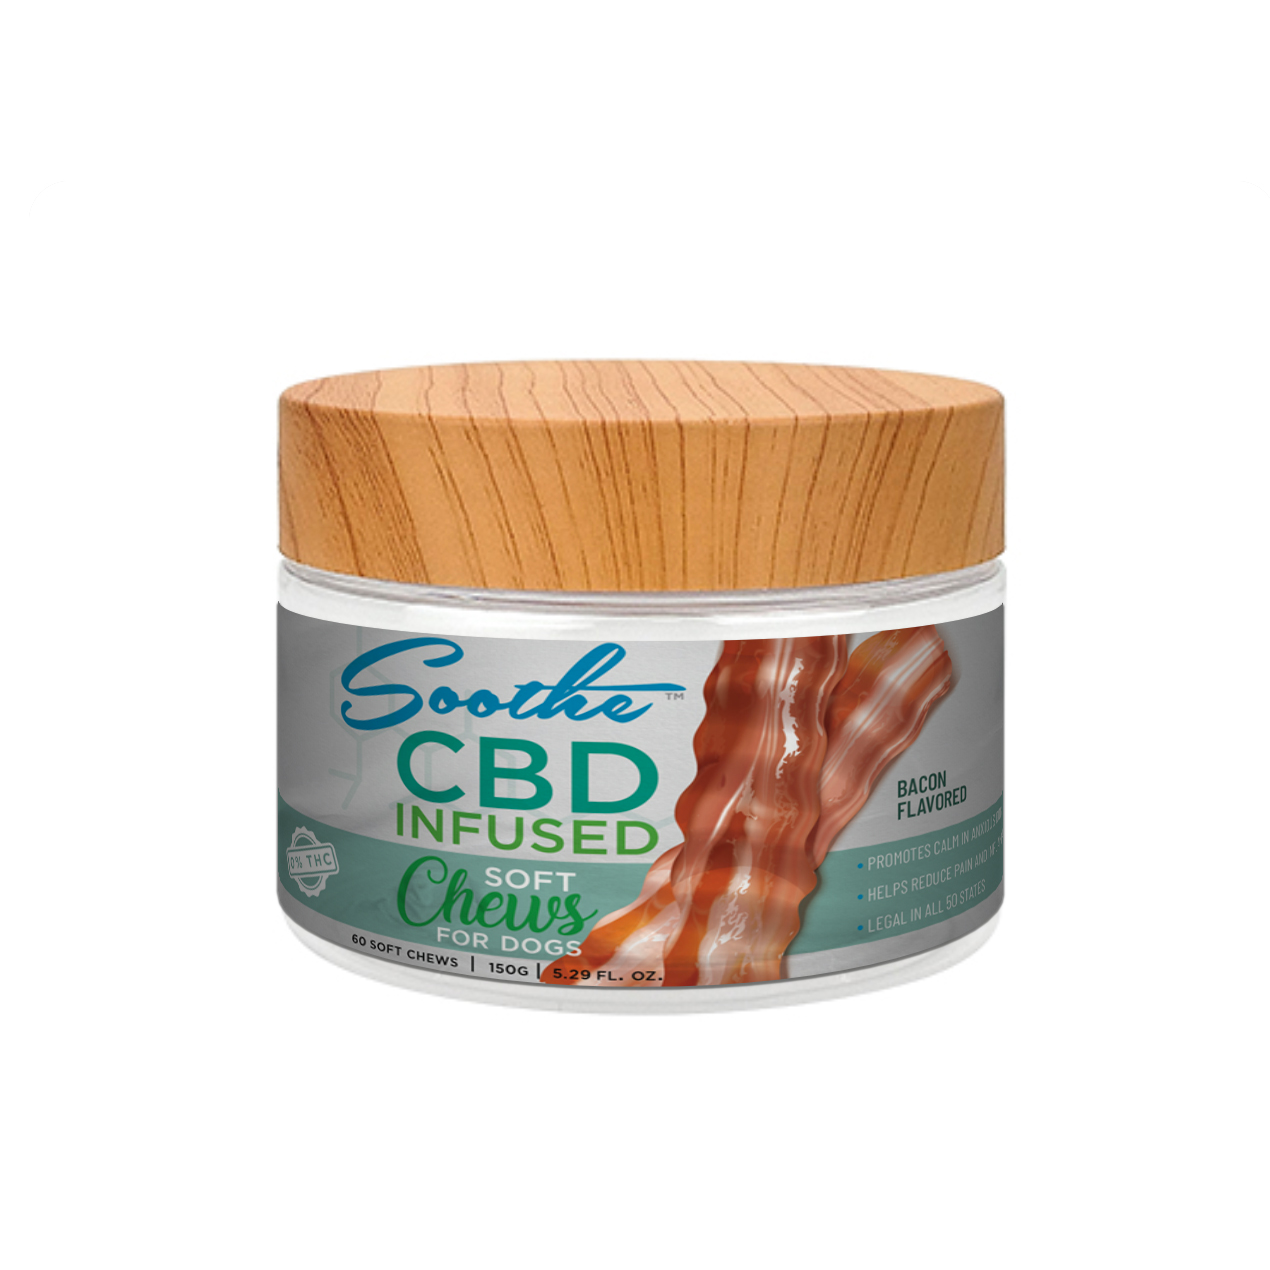 Soothe CBD Infused Bacon Flavor Soft Chews